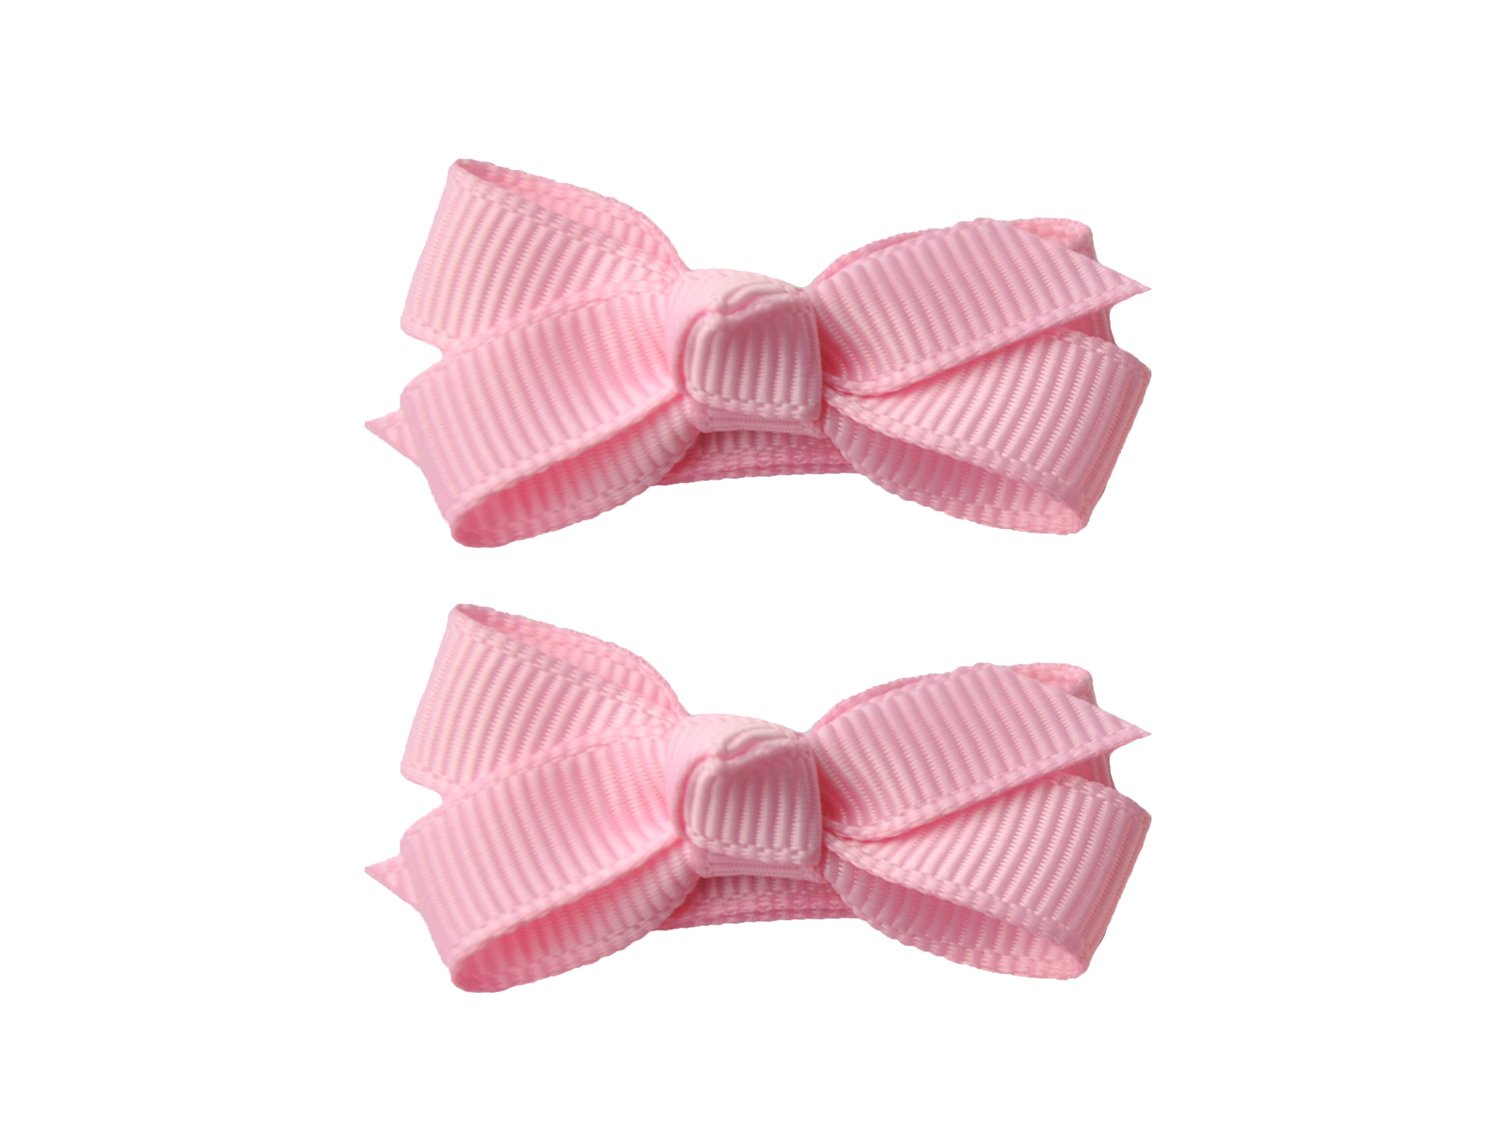 Small Snap Chelsea Boutique Bow - 2 pack - Rose Petal Pink Baby Wisp